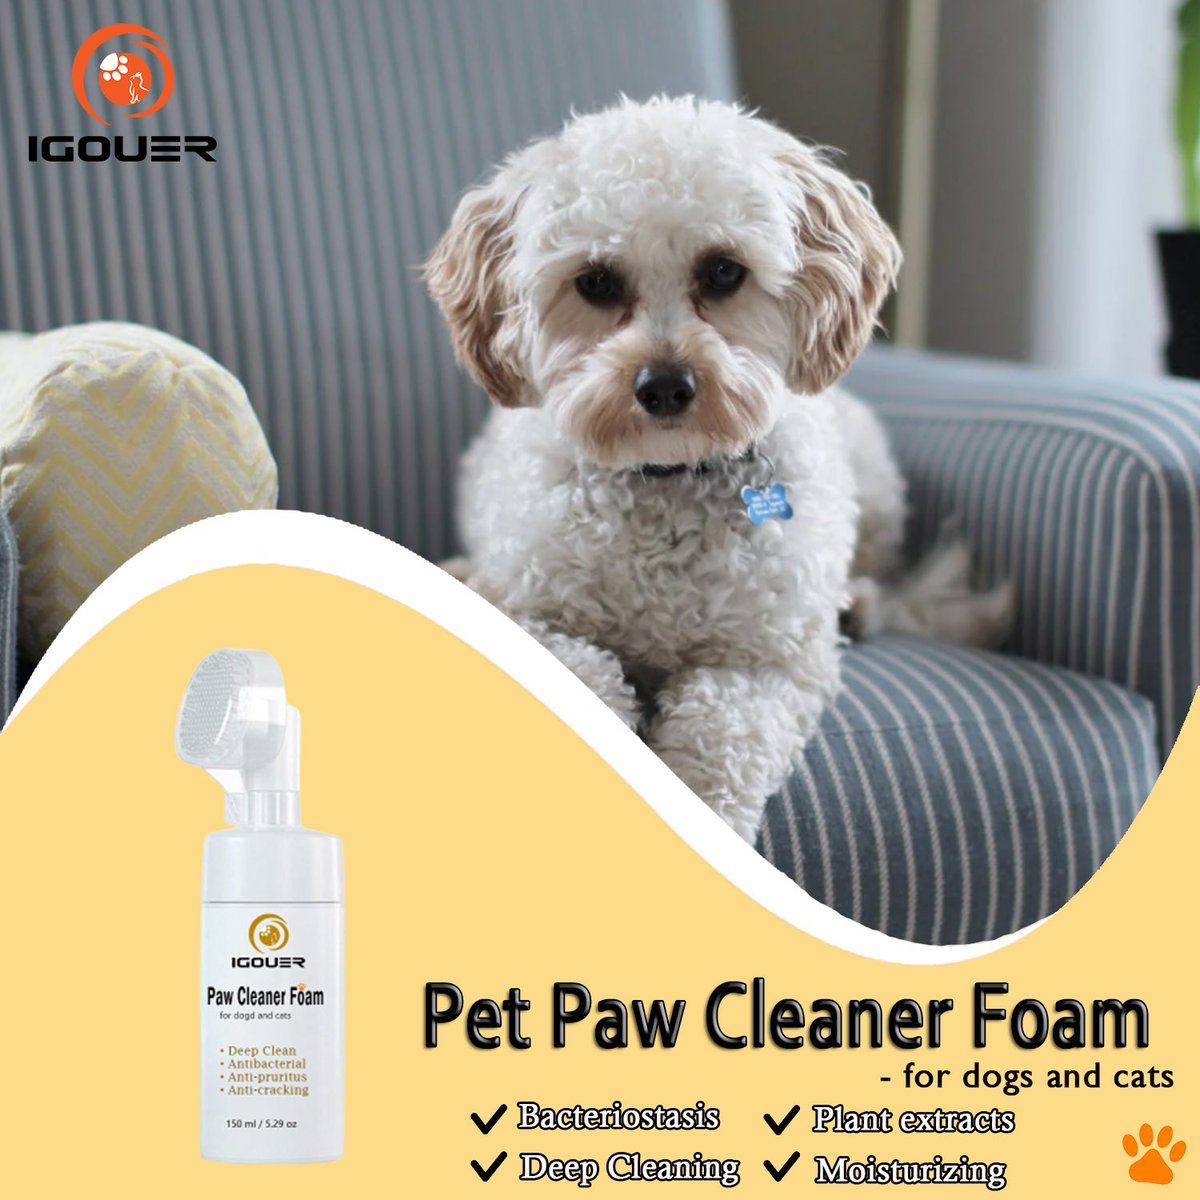 Pet Paw Cleaner Foam🐾 used for daily cleaning and care of pet feet, moisturizing pet feet, and inhibiting bacteria.

#dogpawcleaner 
#catpawcleaner 
#petpawprotection 
#petpawproduct 
#dogpawcare 
#catpawcare 
#petpawcare 
#pethealthcare 
#igouer
#igouerpetcare
#igouerpetproduct